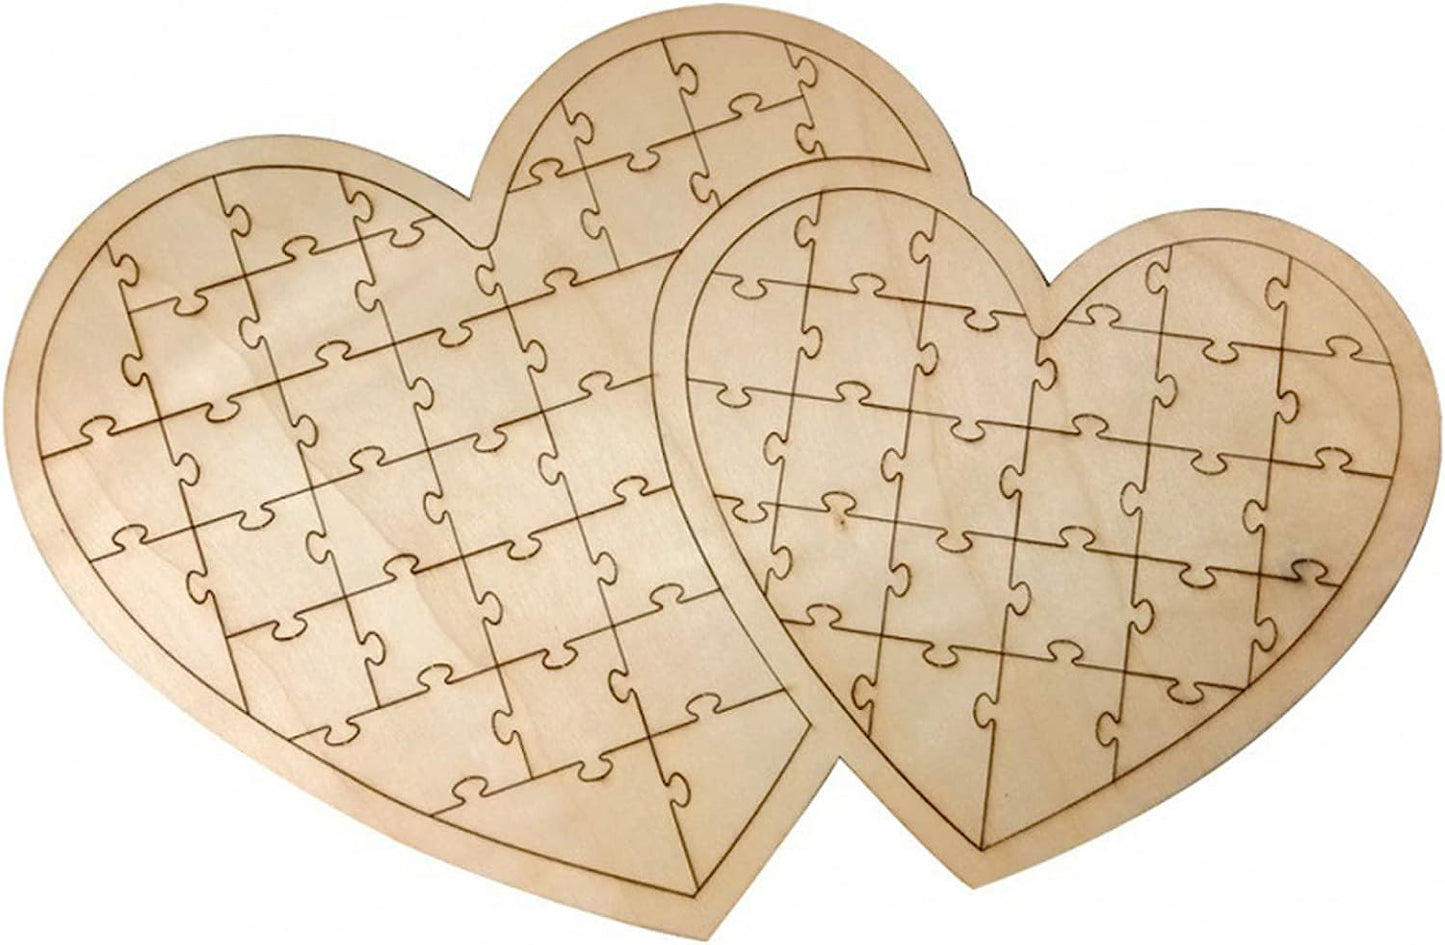 Wooden Jigsaw Puzzle Guest Book，Double Heart Wooden Jigsaw Puzzle Wedding Guest Book，Personalized Wedding Guestbook Idea Unique Personalized Wedding Jigsaw Puzzle Guestbook (Baby Bottle Shape)